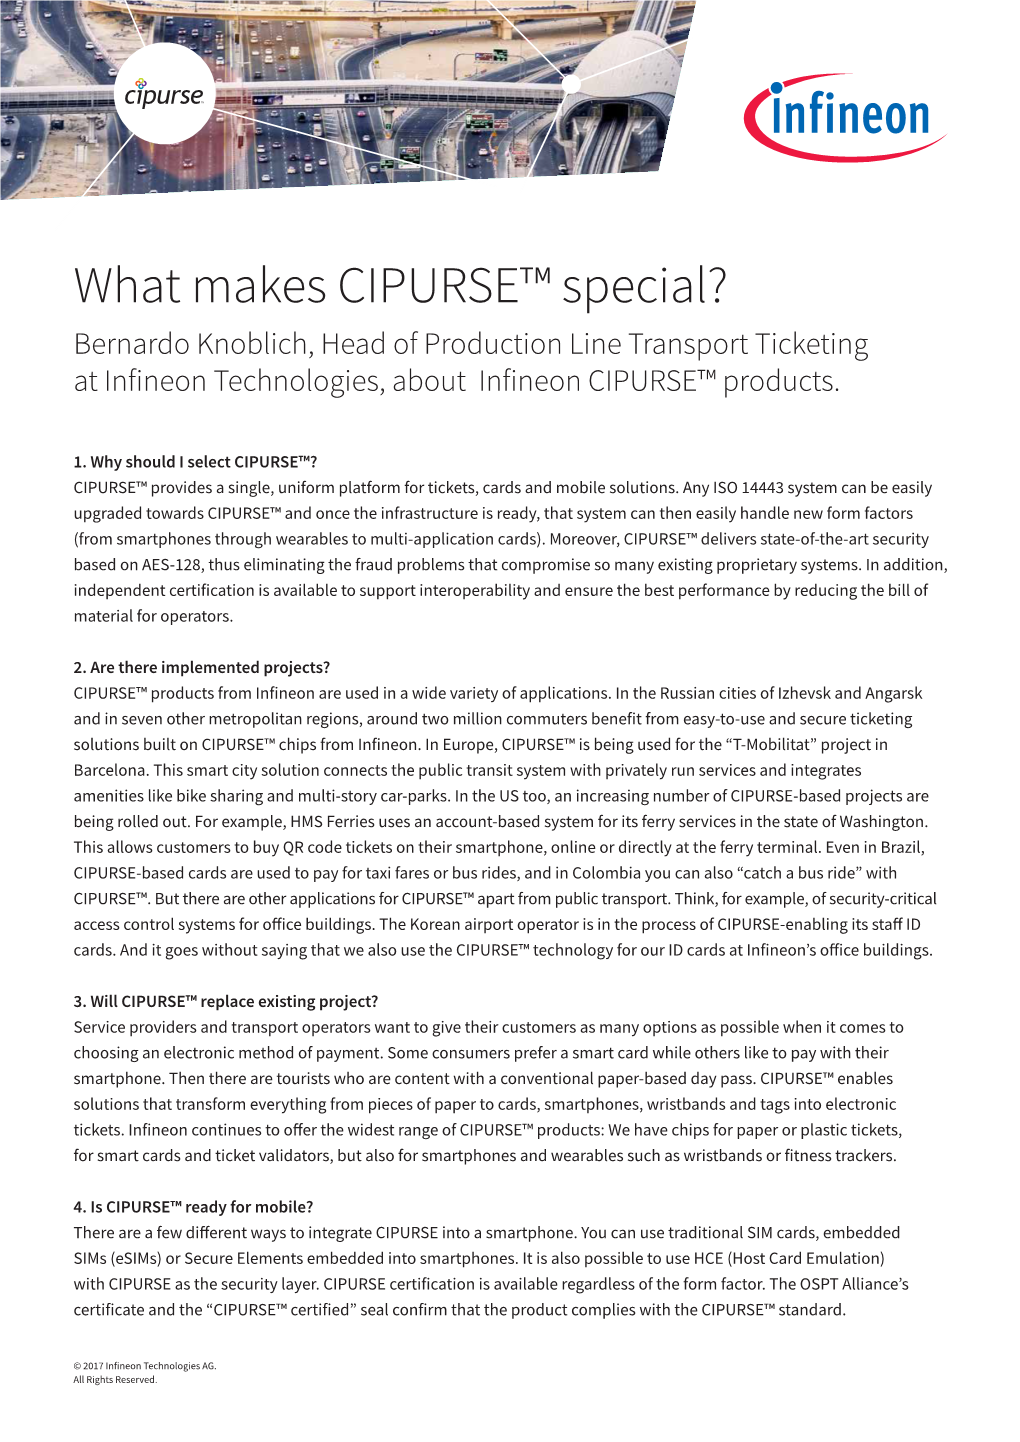 What Makes CIPURSE™ Special? Bernardo Knoblich, Head of Production Line Transport Ticketing at Infineon Technologies, About Infineon CIPURSE™ Products